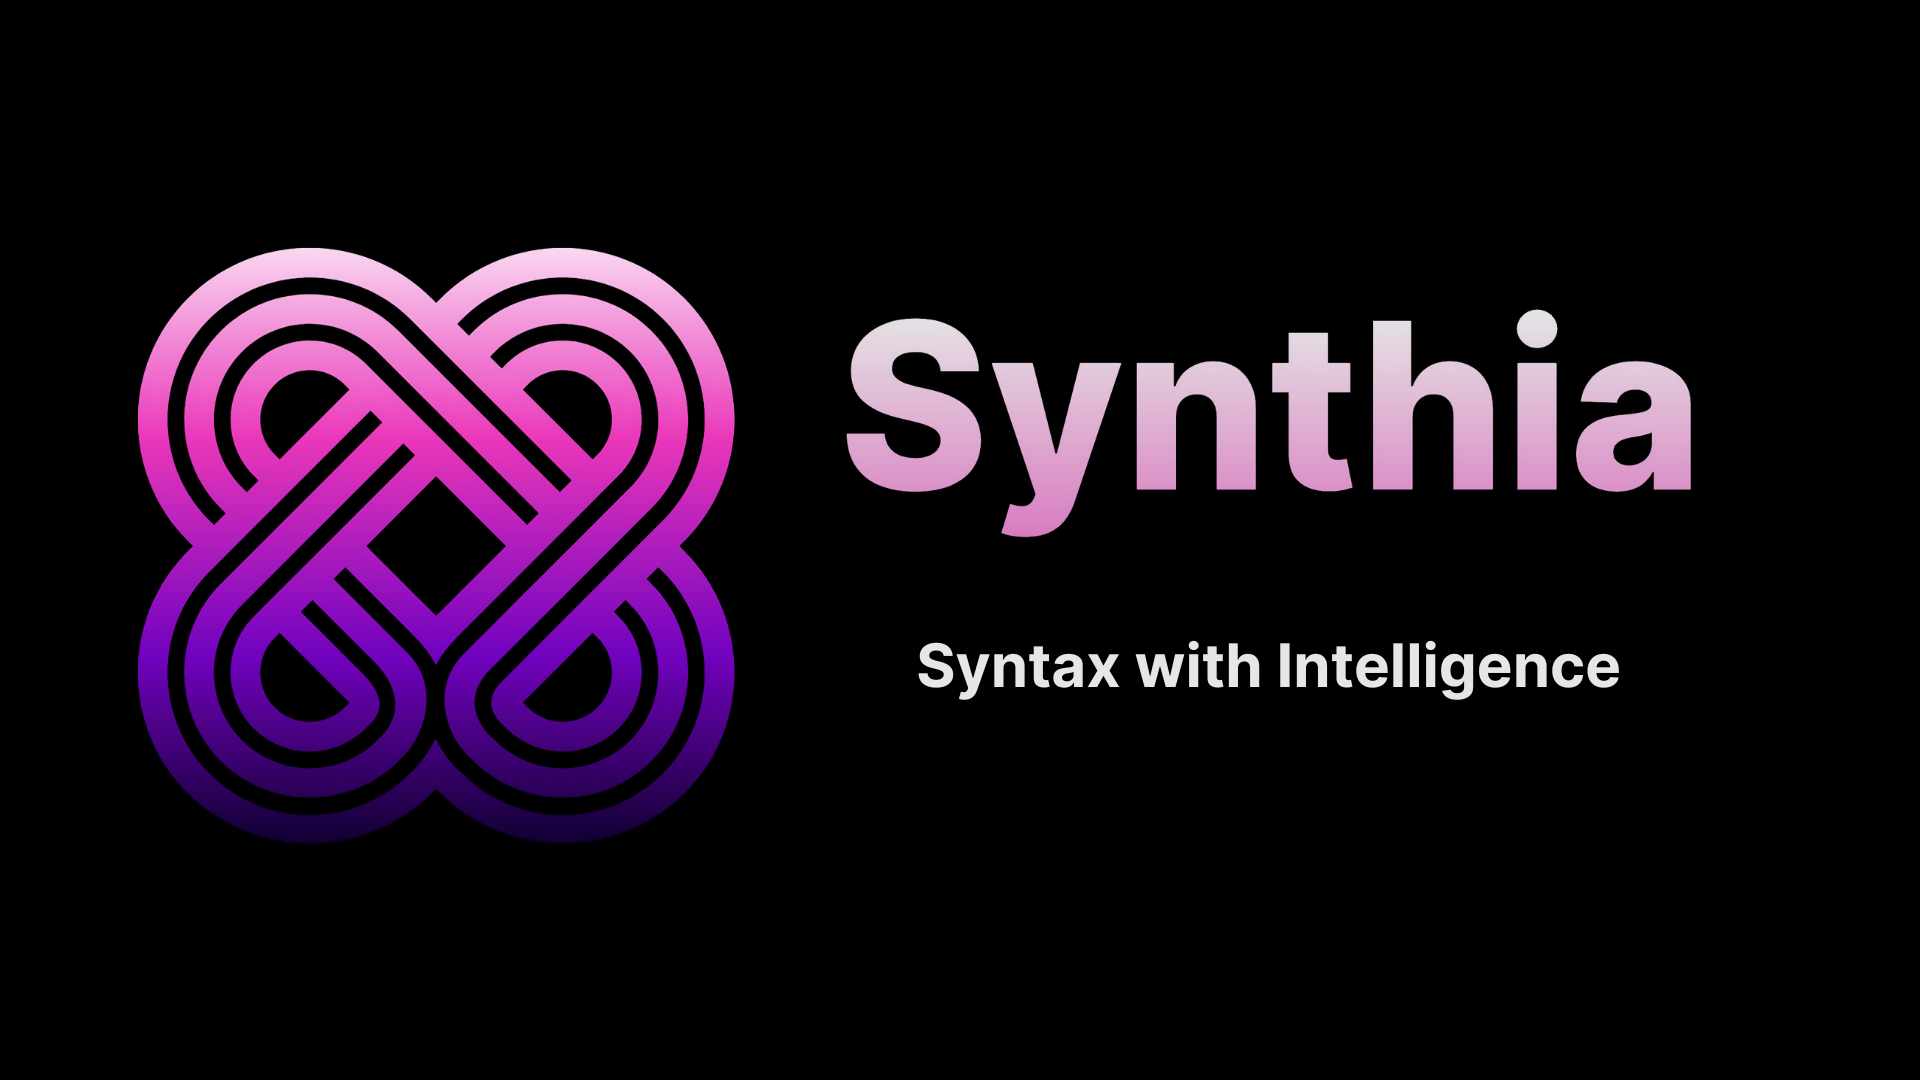 An image of the Synthia project.